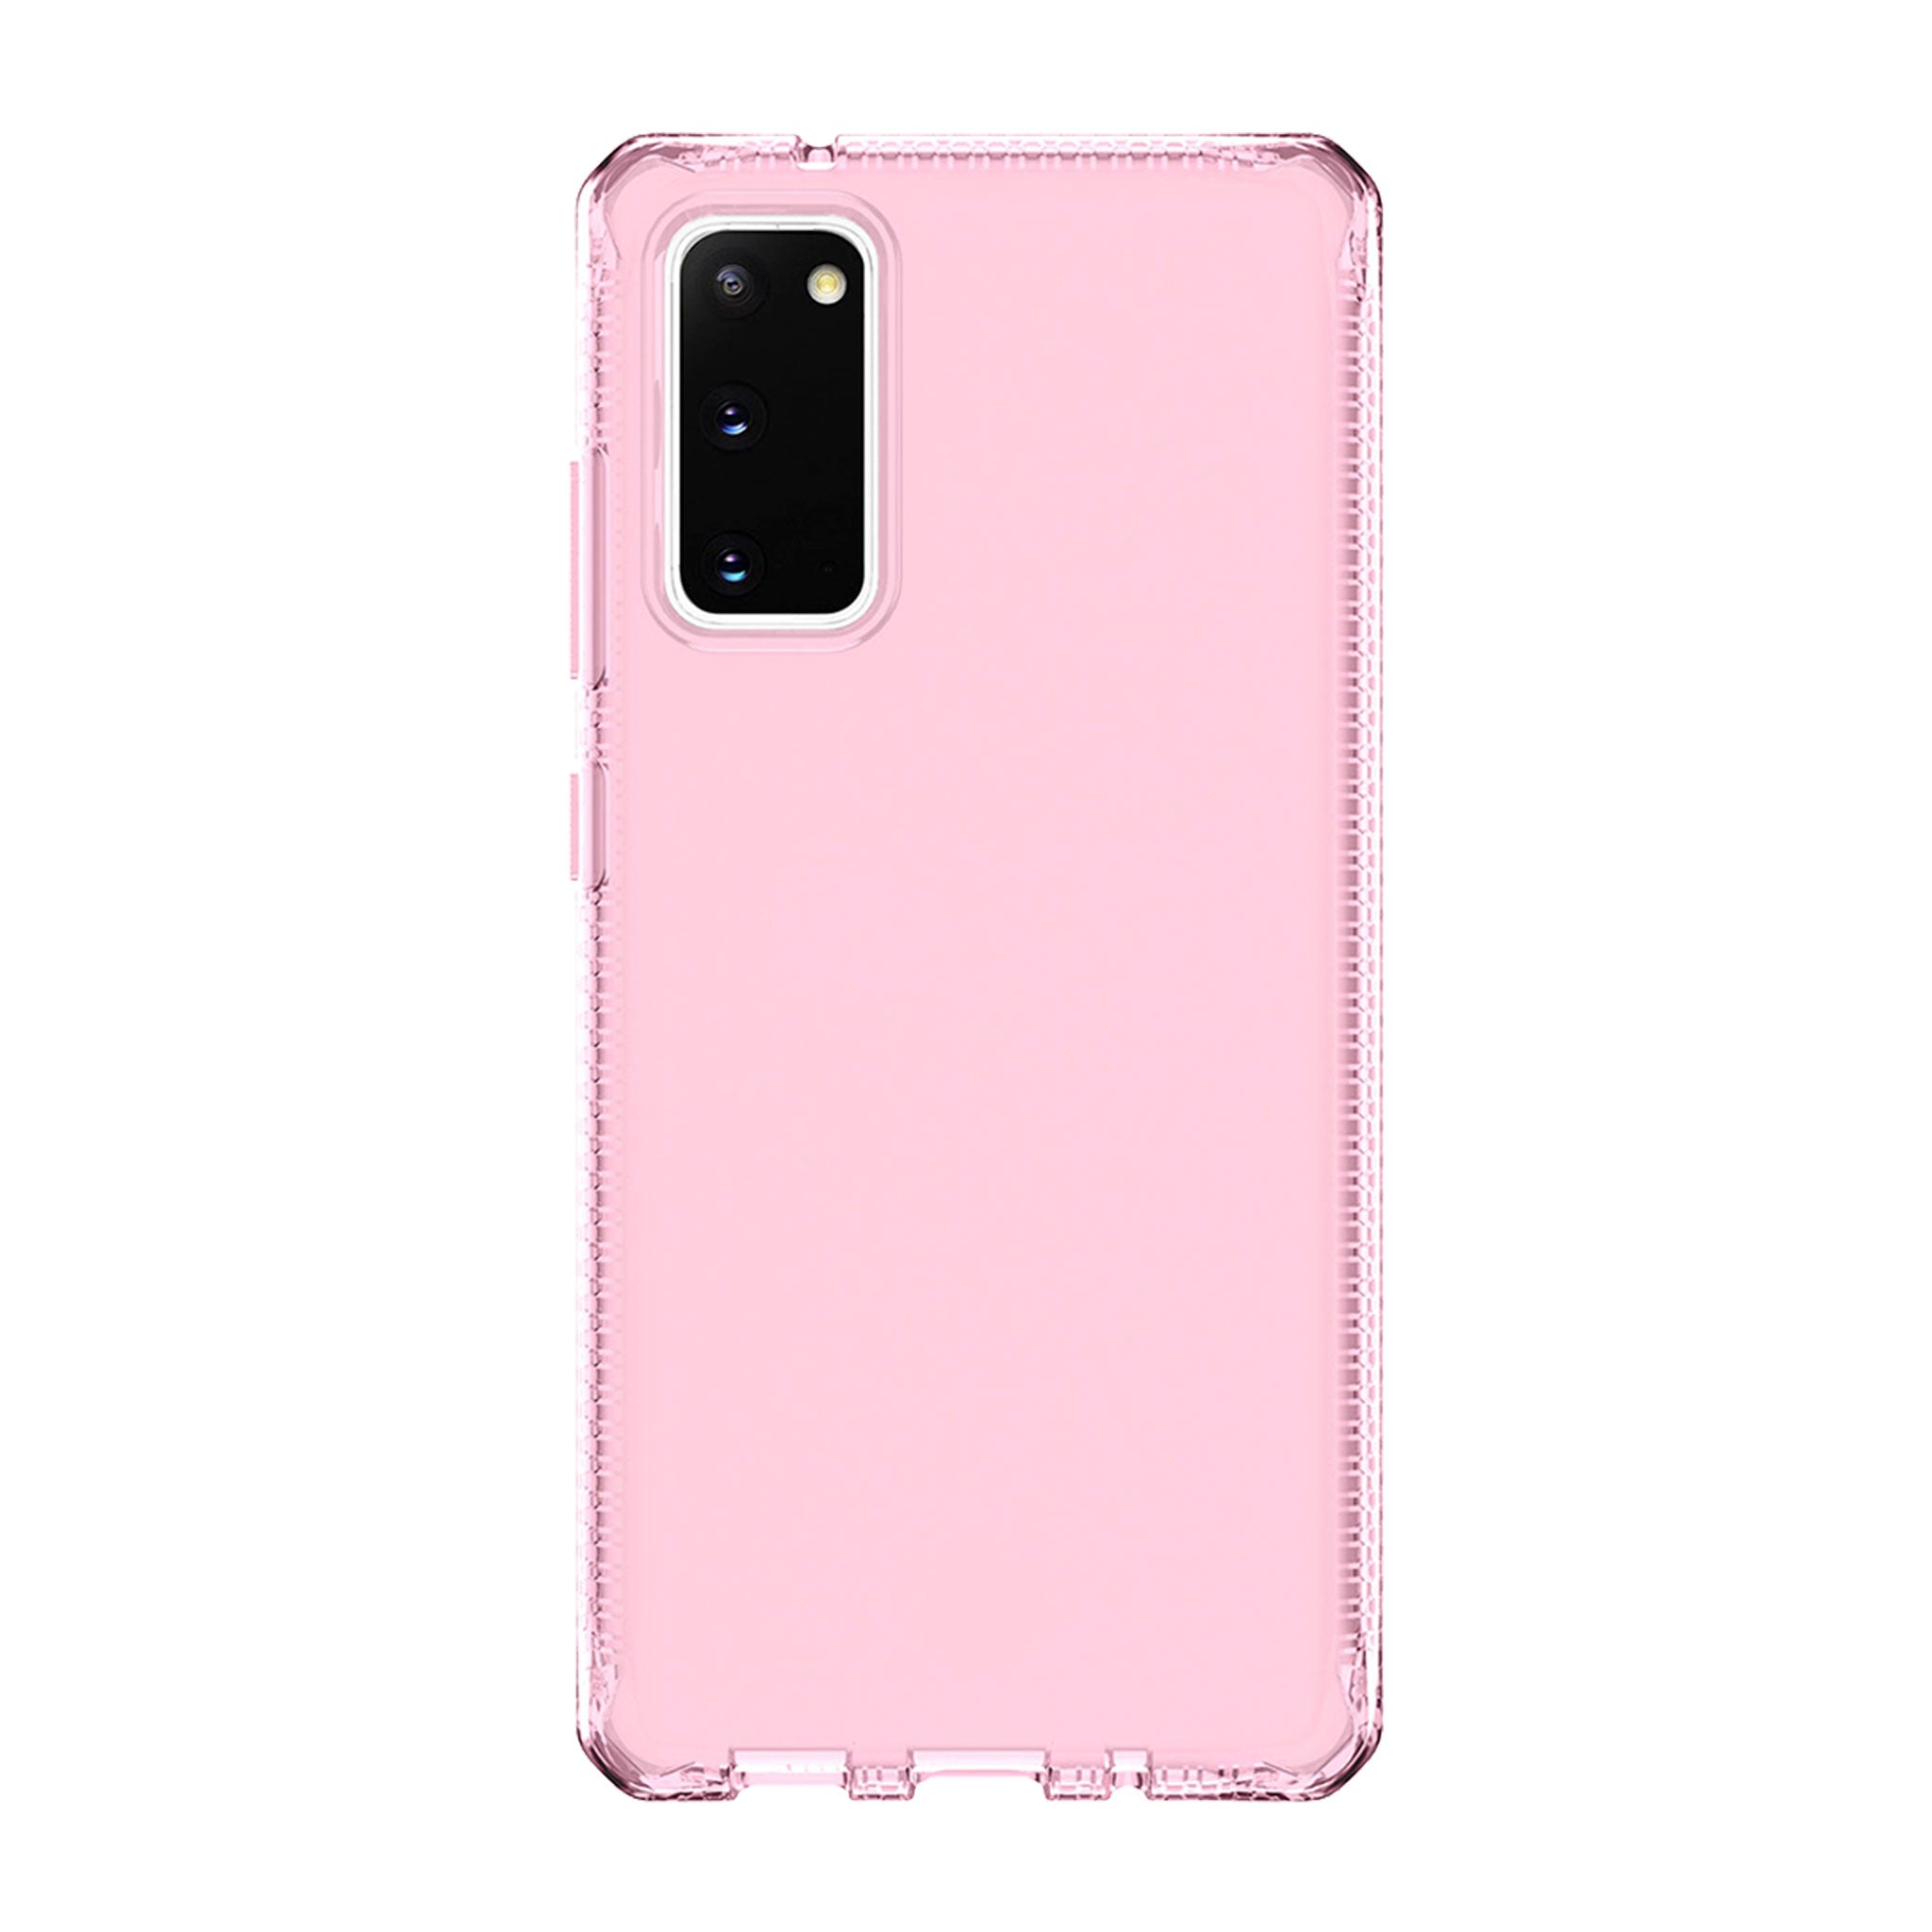 Itskins - Spectrum Clear Case For Samsung Galaxy S20 Fe 5g - Light Pink